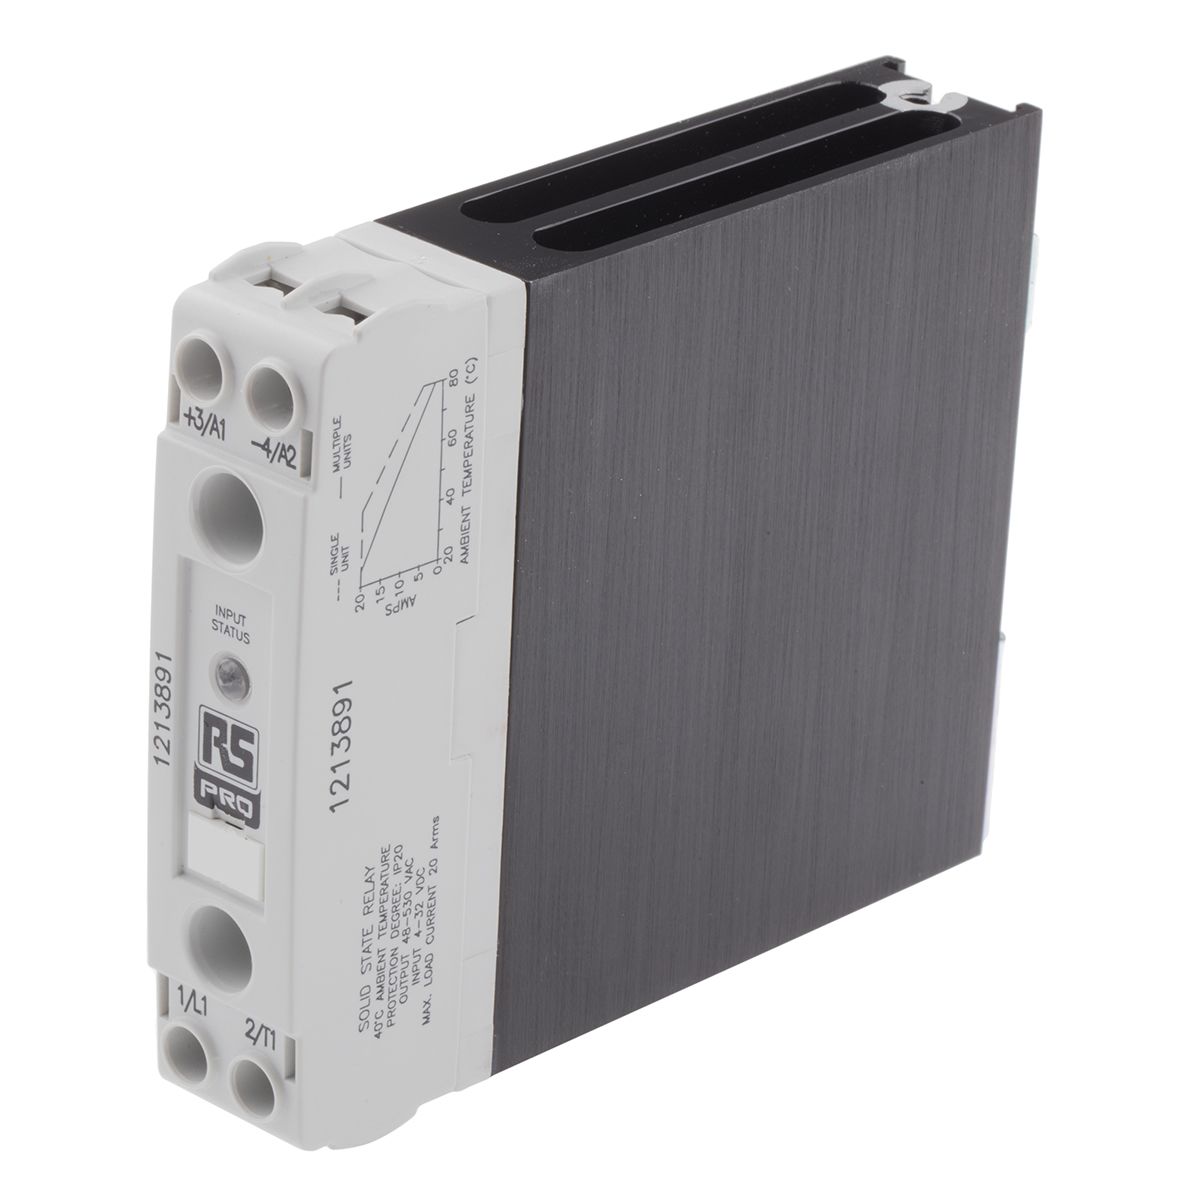 RS PRO DIN Rail Solid State Relay, 20 A Max. Load, 530 Vrms Max. Load, 32 V dc Max. Control